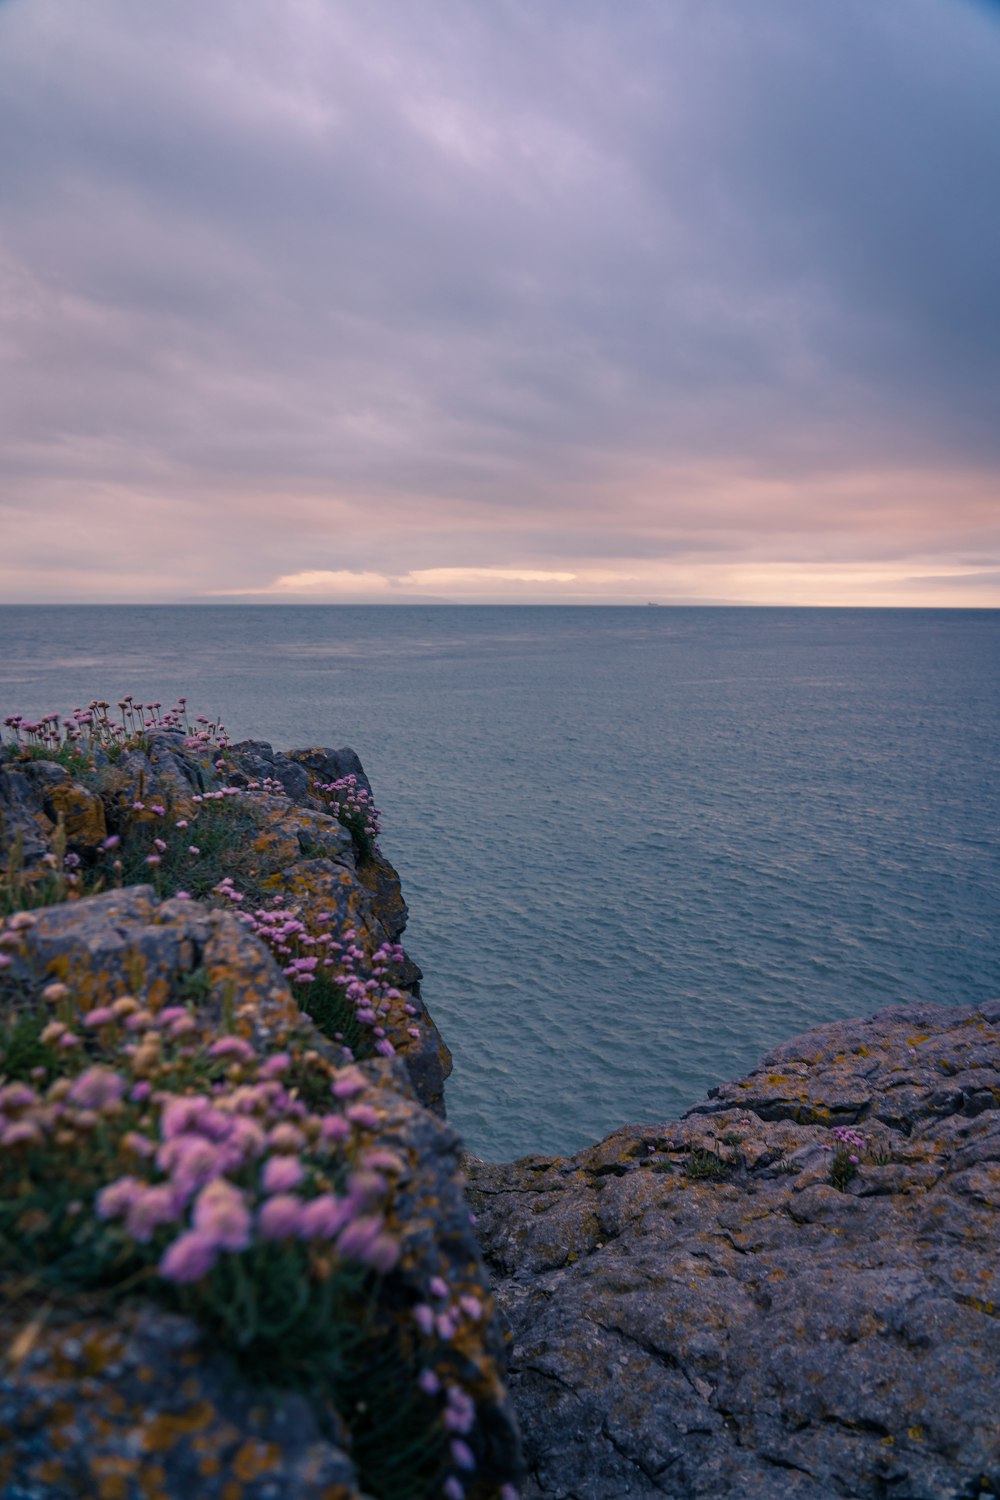 purple flowers growing on the edge of a cliff by the ocean